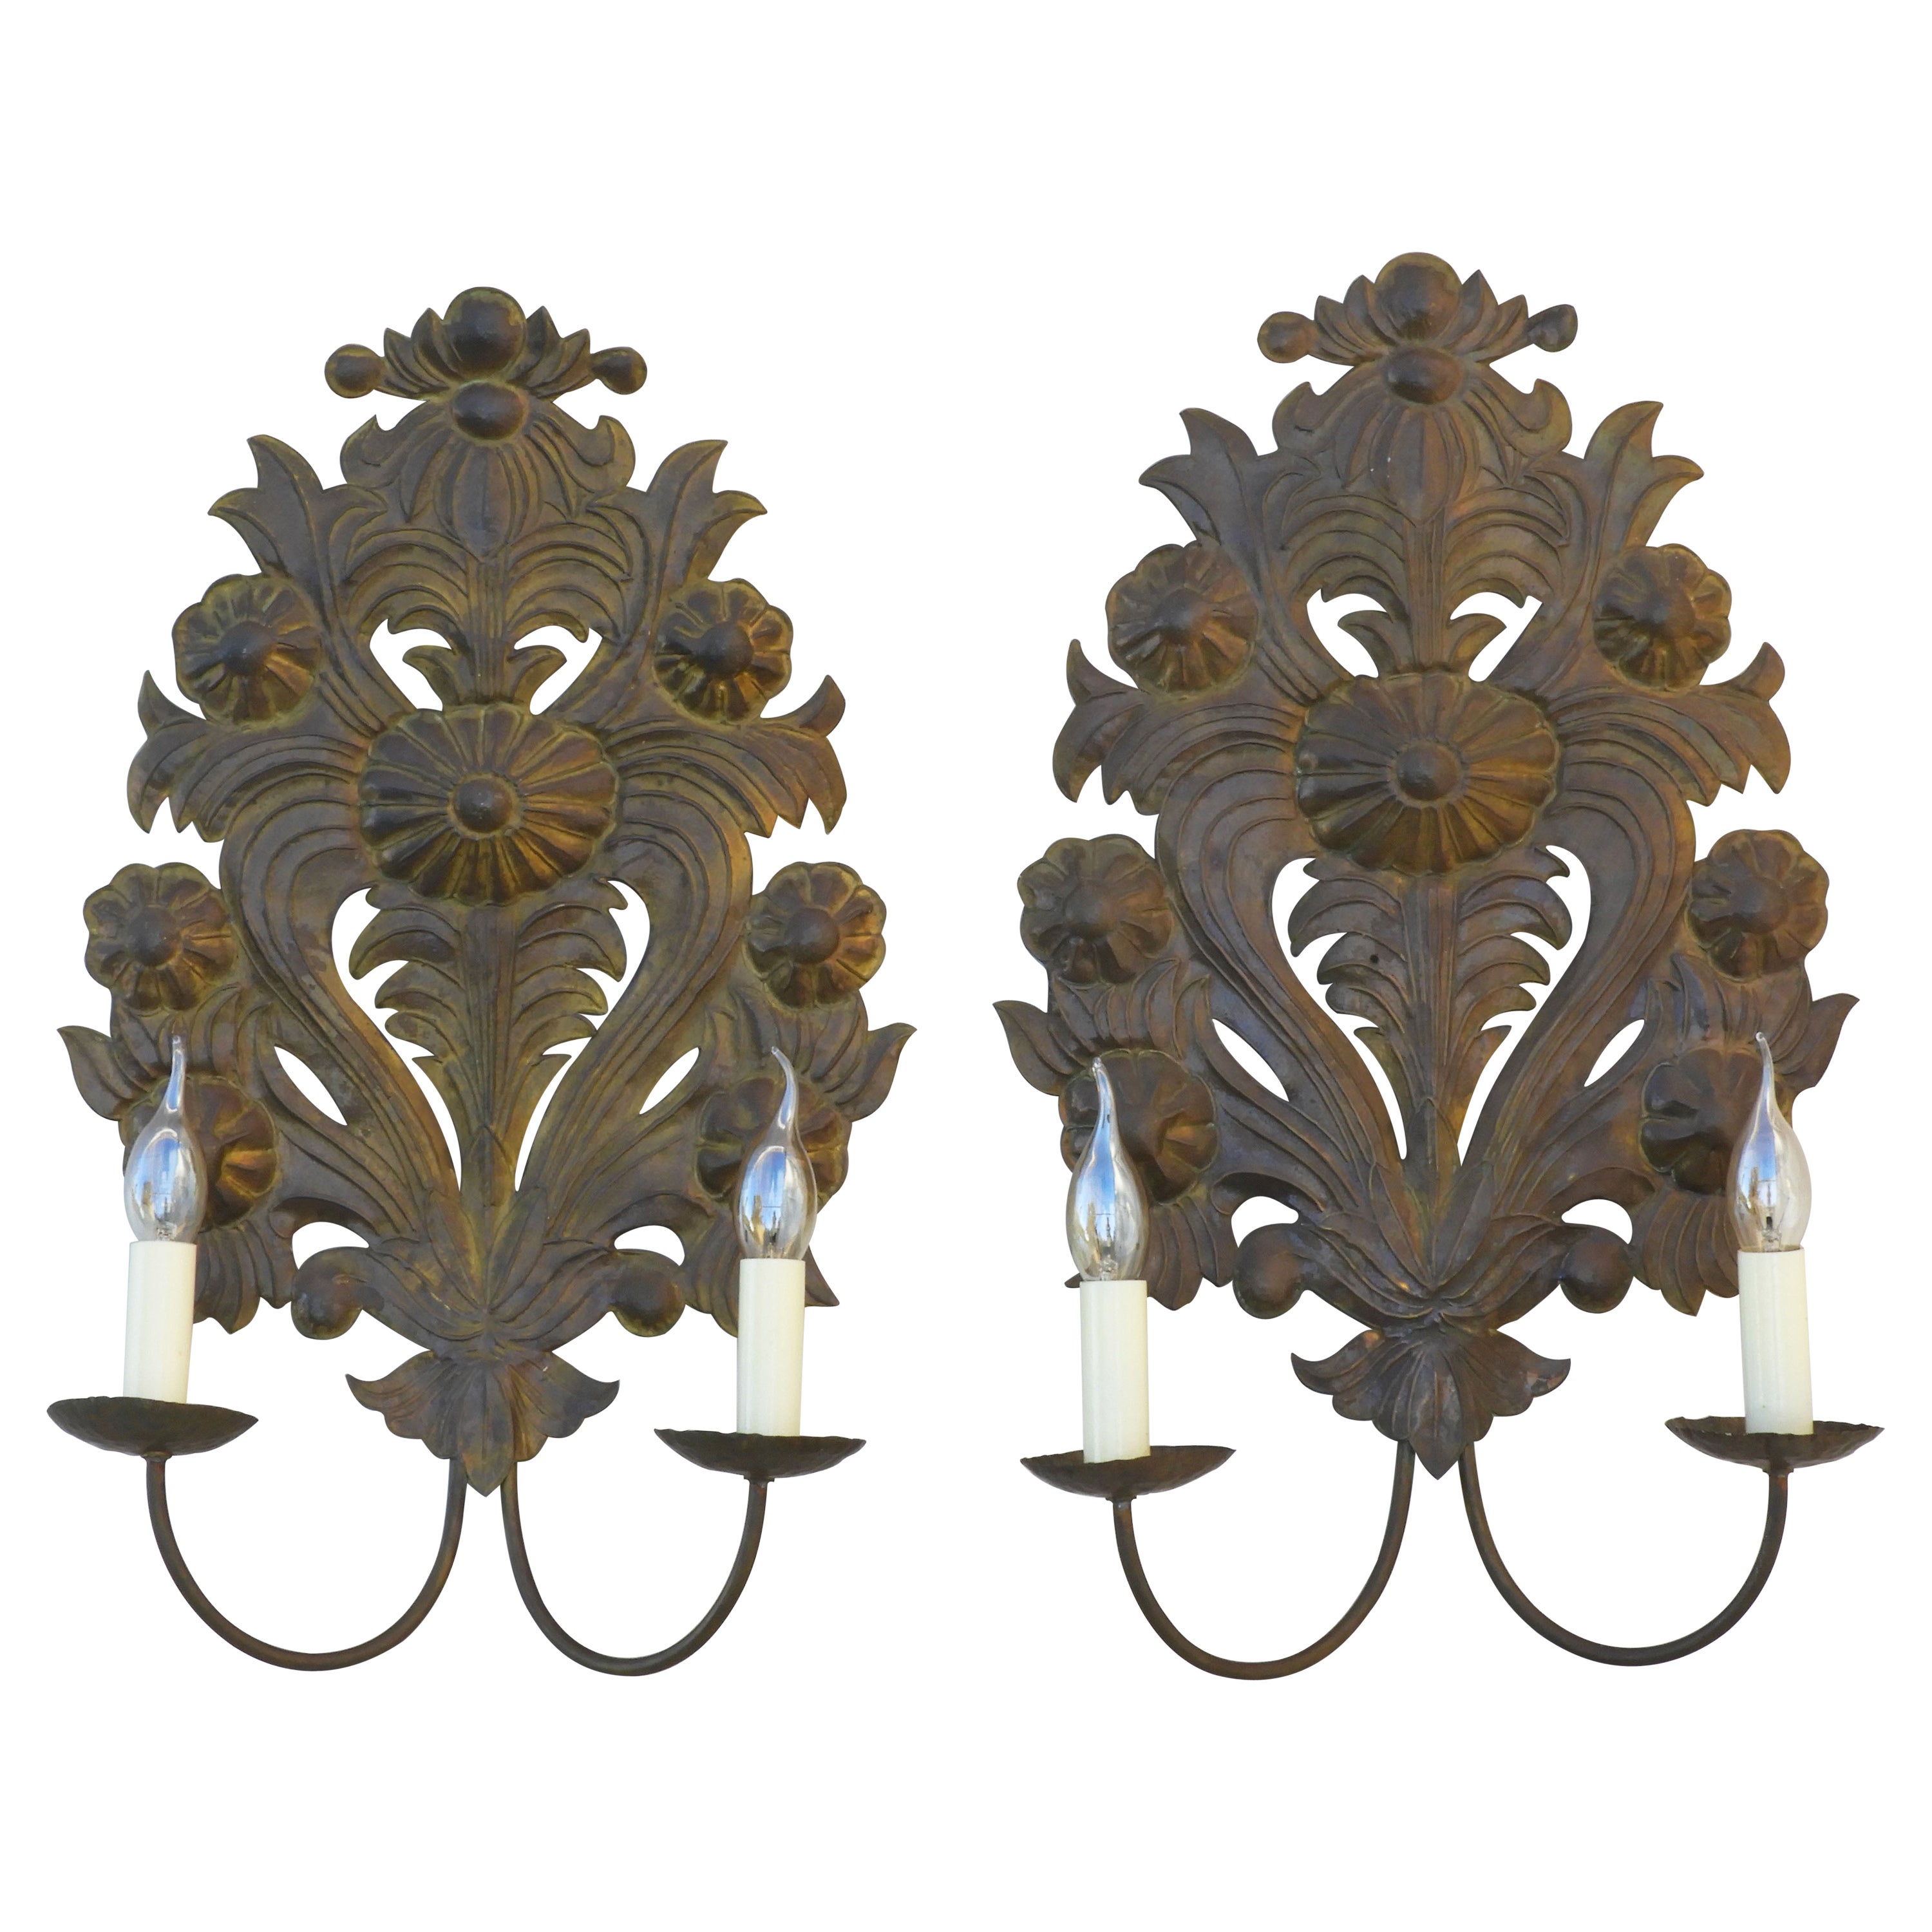 Pair of Large French Floral Wall Light Sconces Tôle Repoussé C1900 FREE SHIPPING